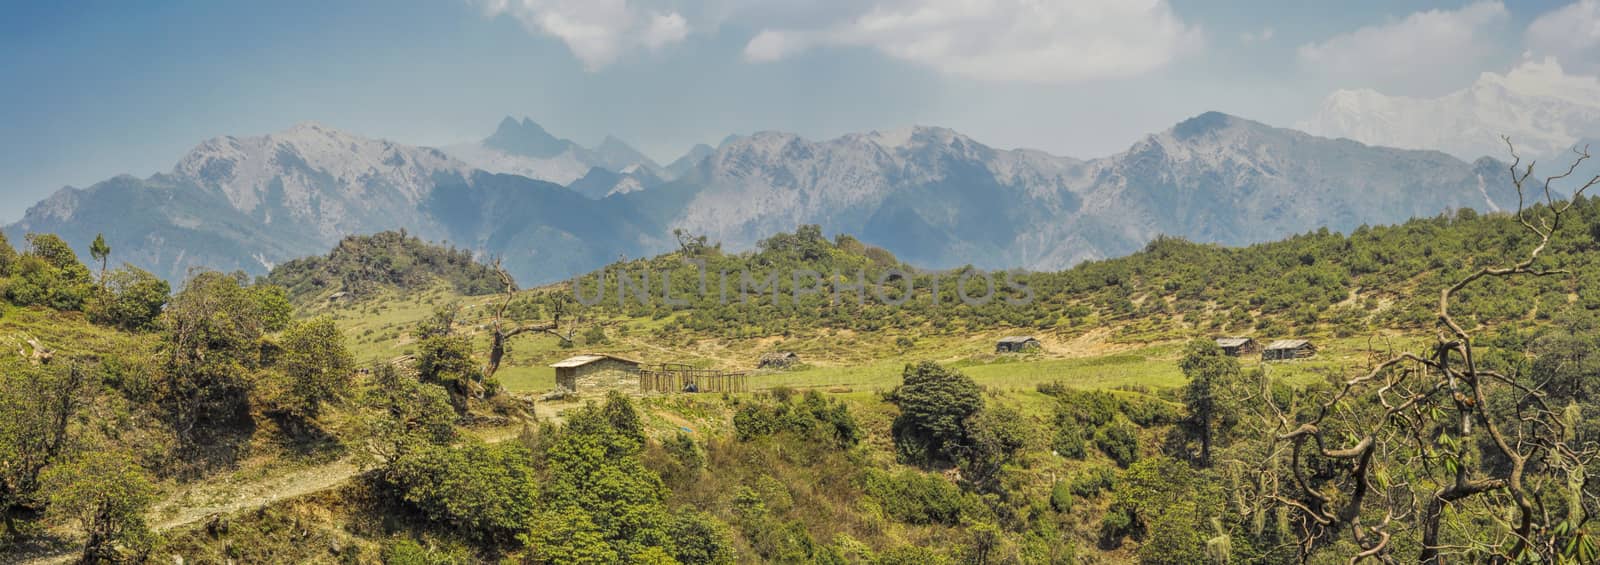 Scenic panorama of settlement in Dolpo region in Nepal